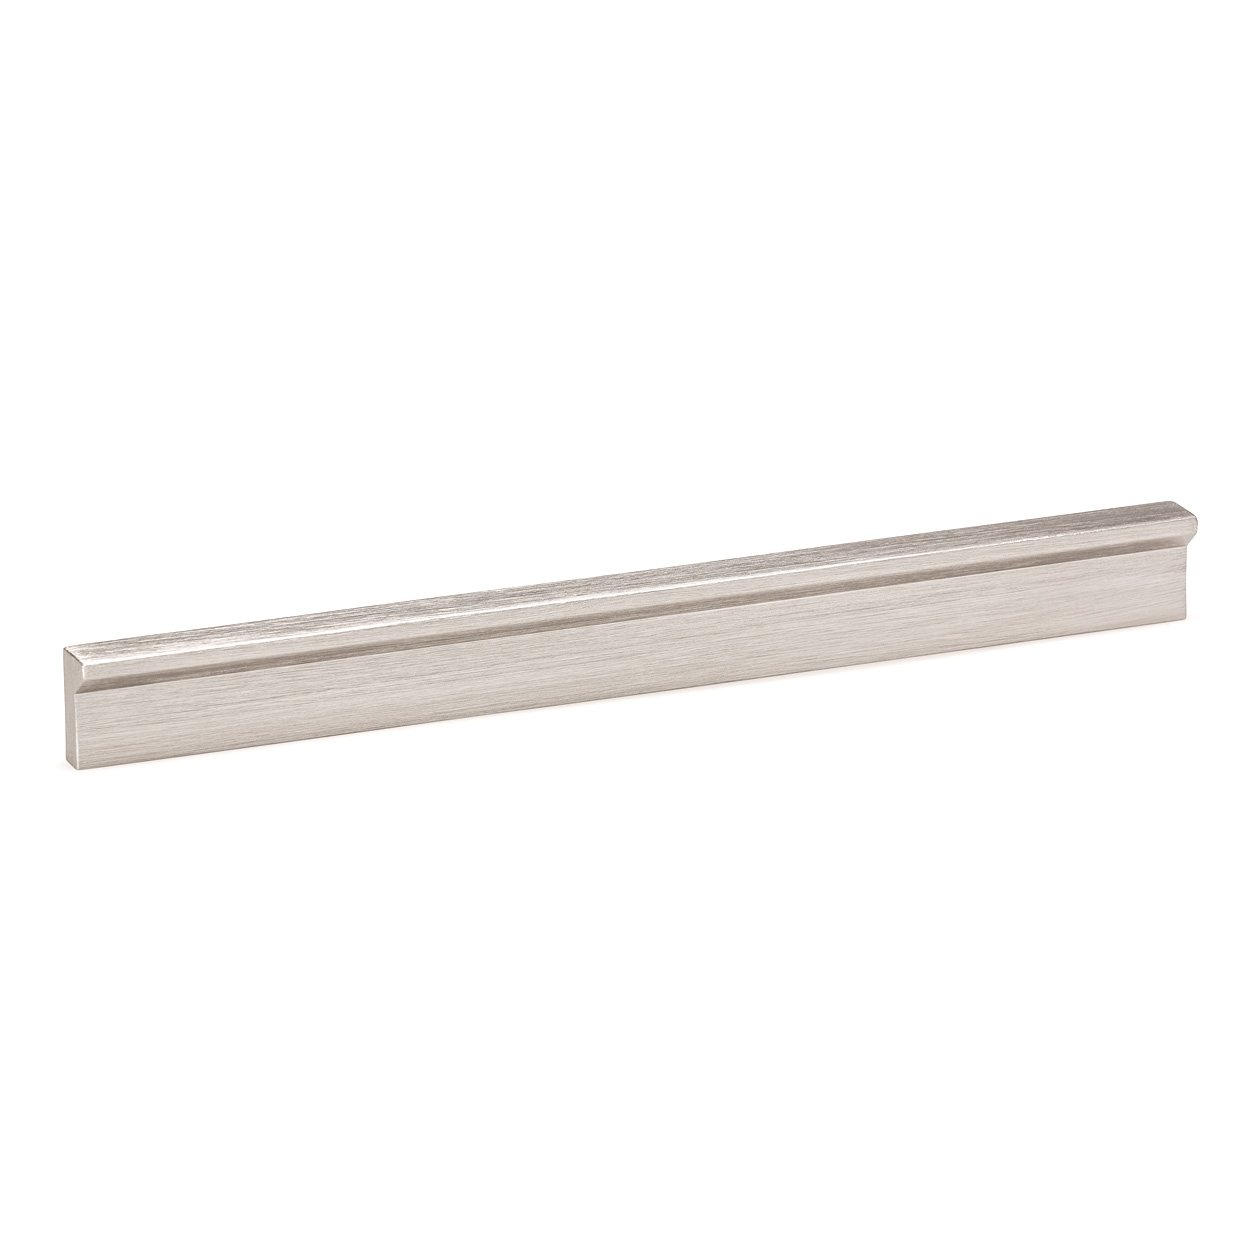 Angle Cabinetry Pull Dull Brushed Nickel Flooring Bathrooms Interiors